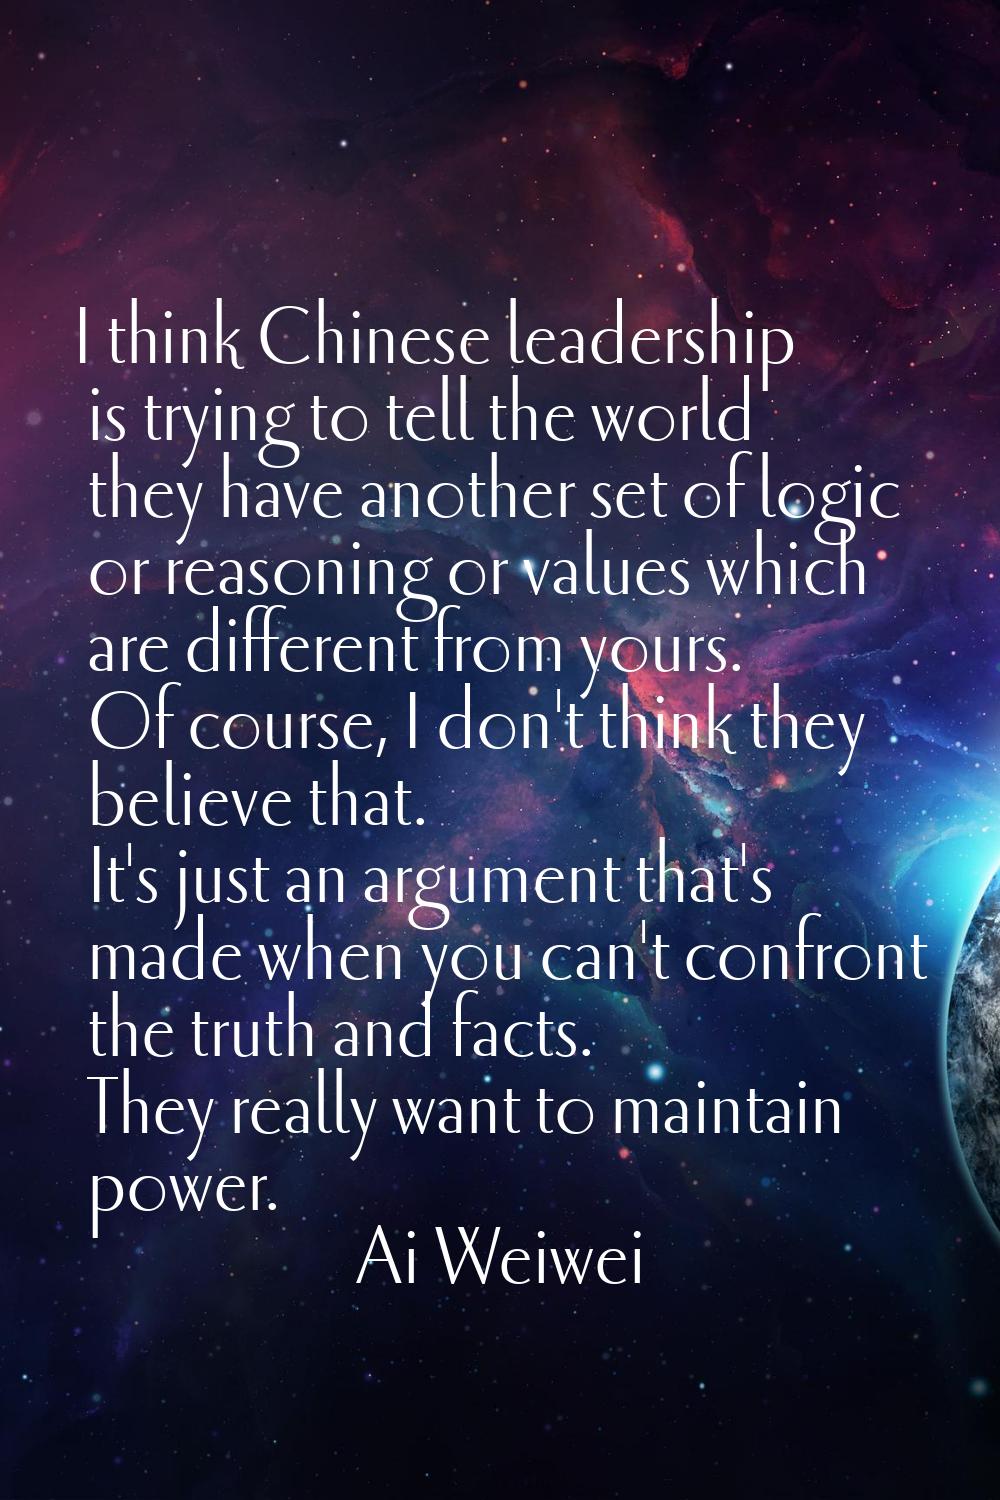 I think Chinese leadership is trying to tell the world they have another set of logic or reasoning 